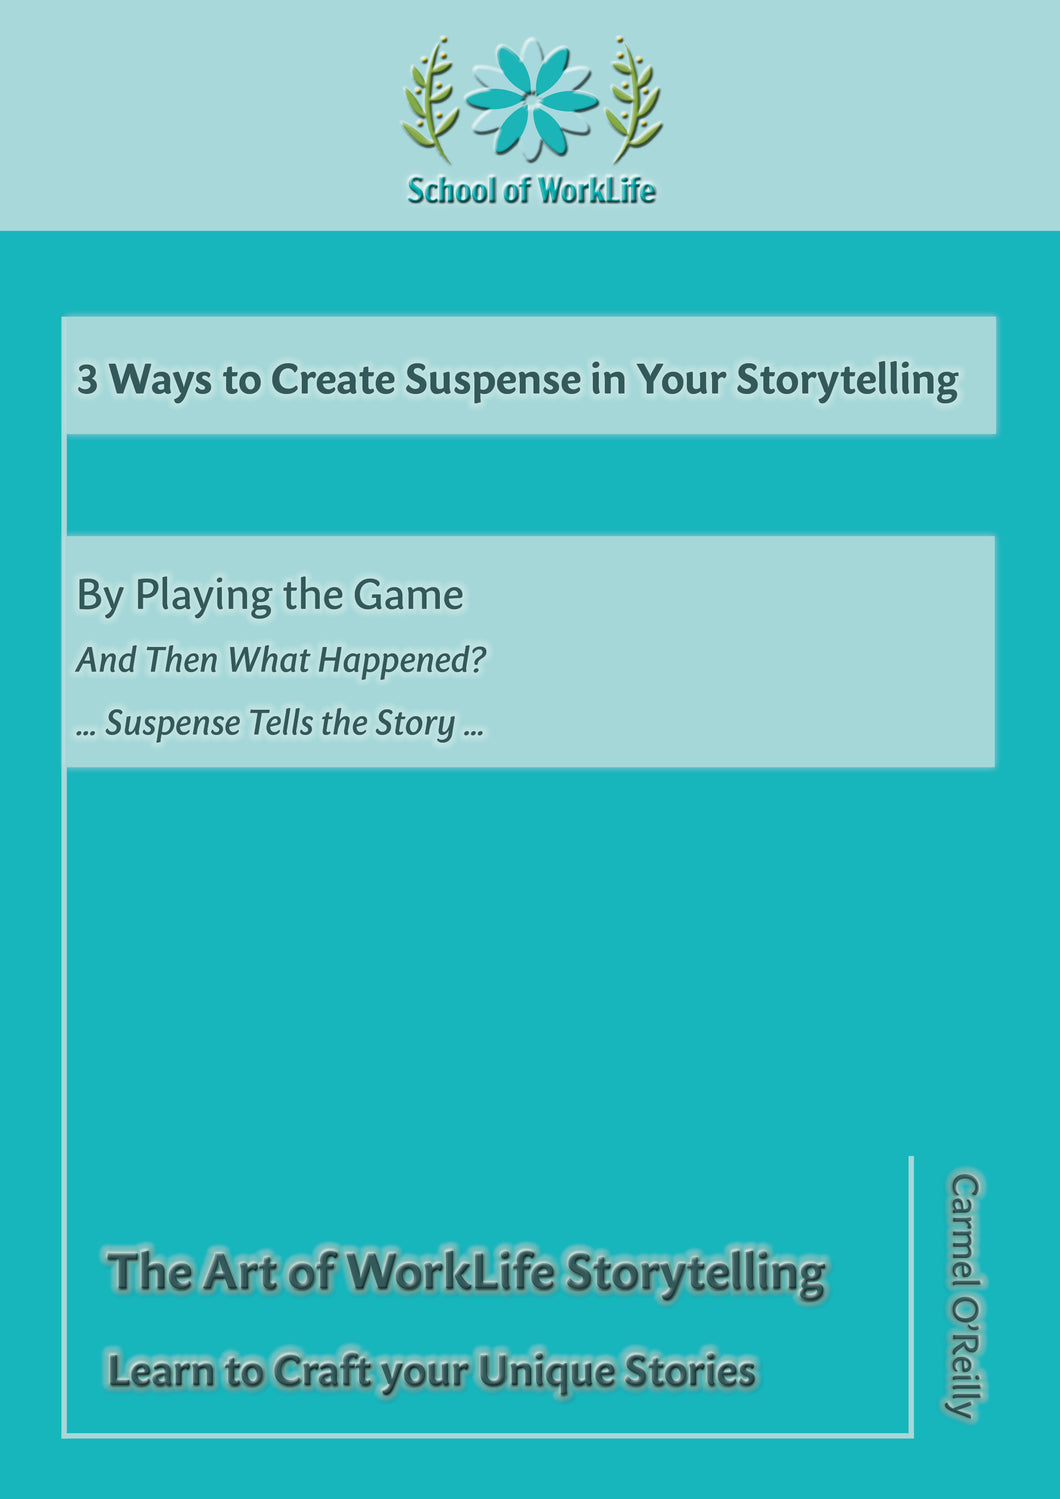 3 Ways to Create Suspense in Your Storytelling